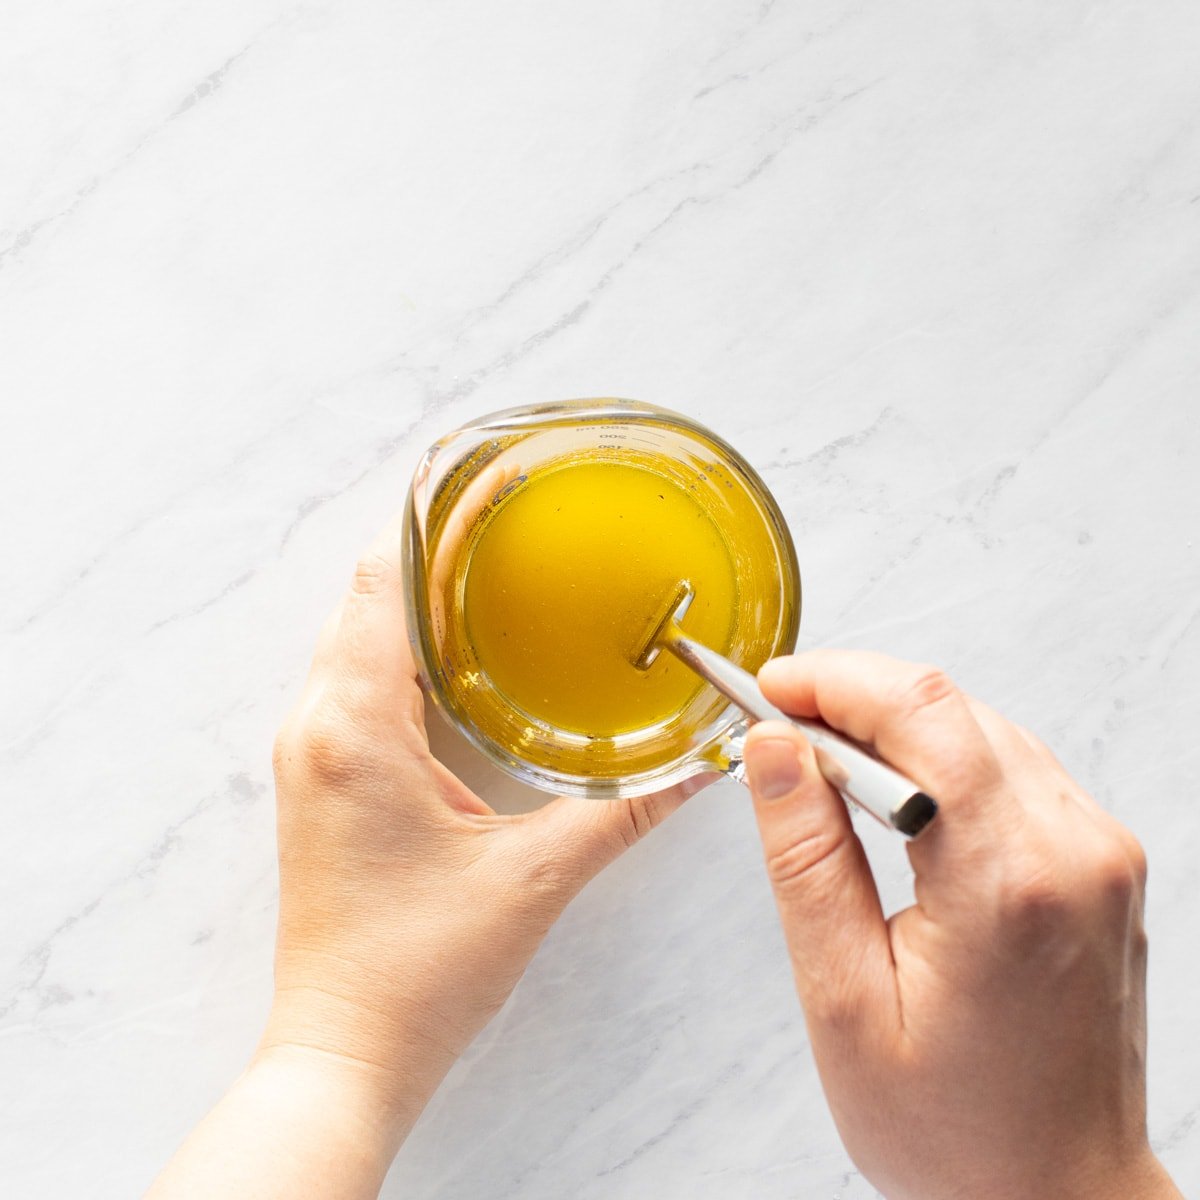 Whisking together a simple lemon vinaigrette in a small glass measuring cup